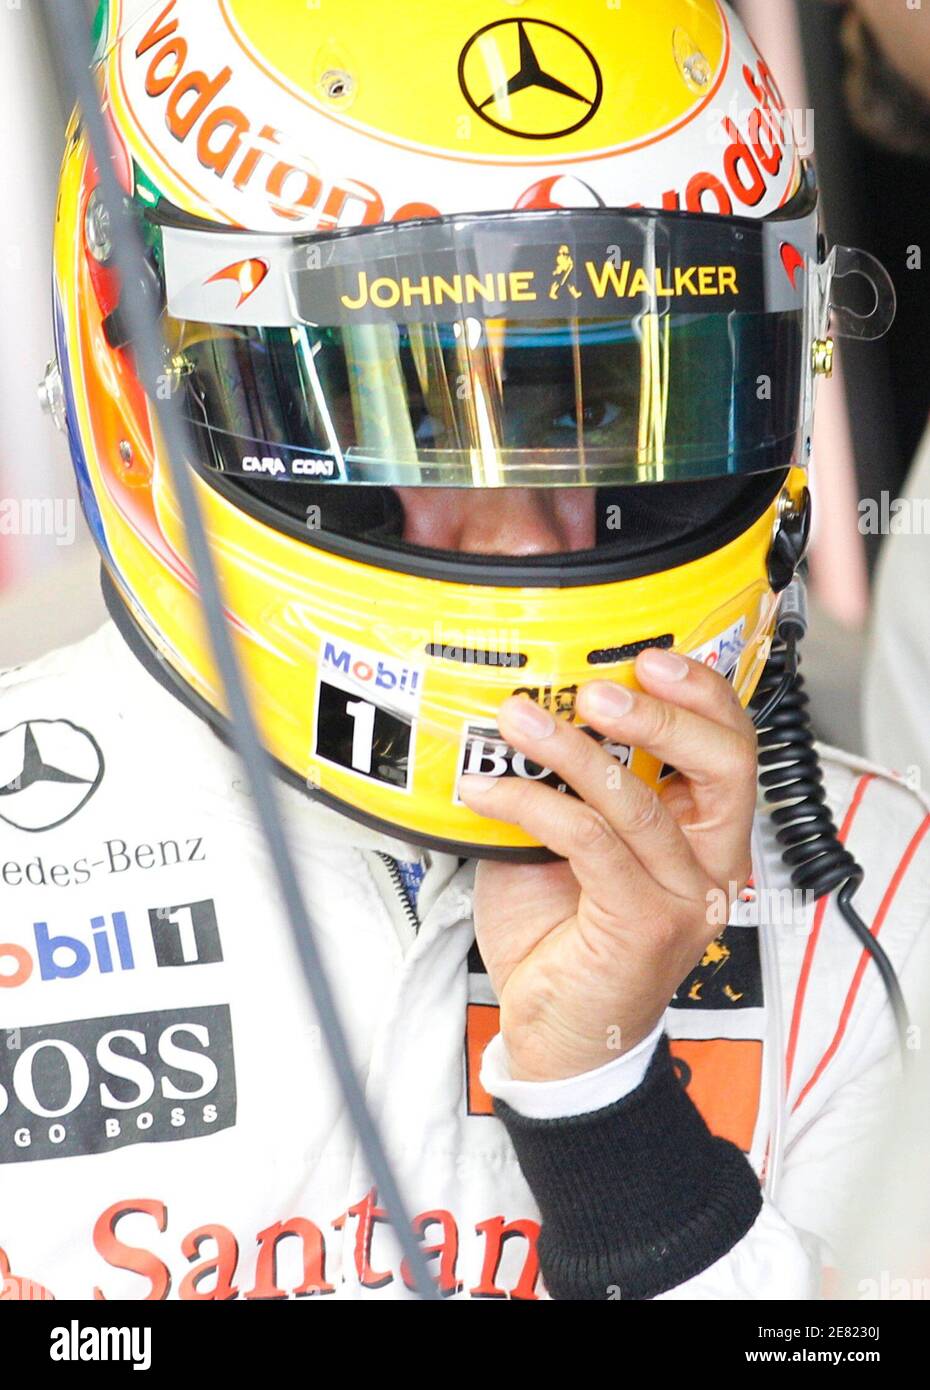 McLaren Formula One driver Lewis Hamilton of Britain removes his helmet  during qualifying at the Australian F1 Grand Prix in Melbourne March 27,  2010. REUTERS/Mark Horsburgh (AUSTRALIA - Tags: SPORT MOTOR RACING